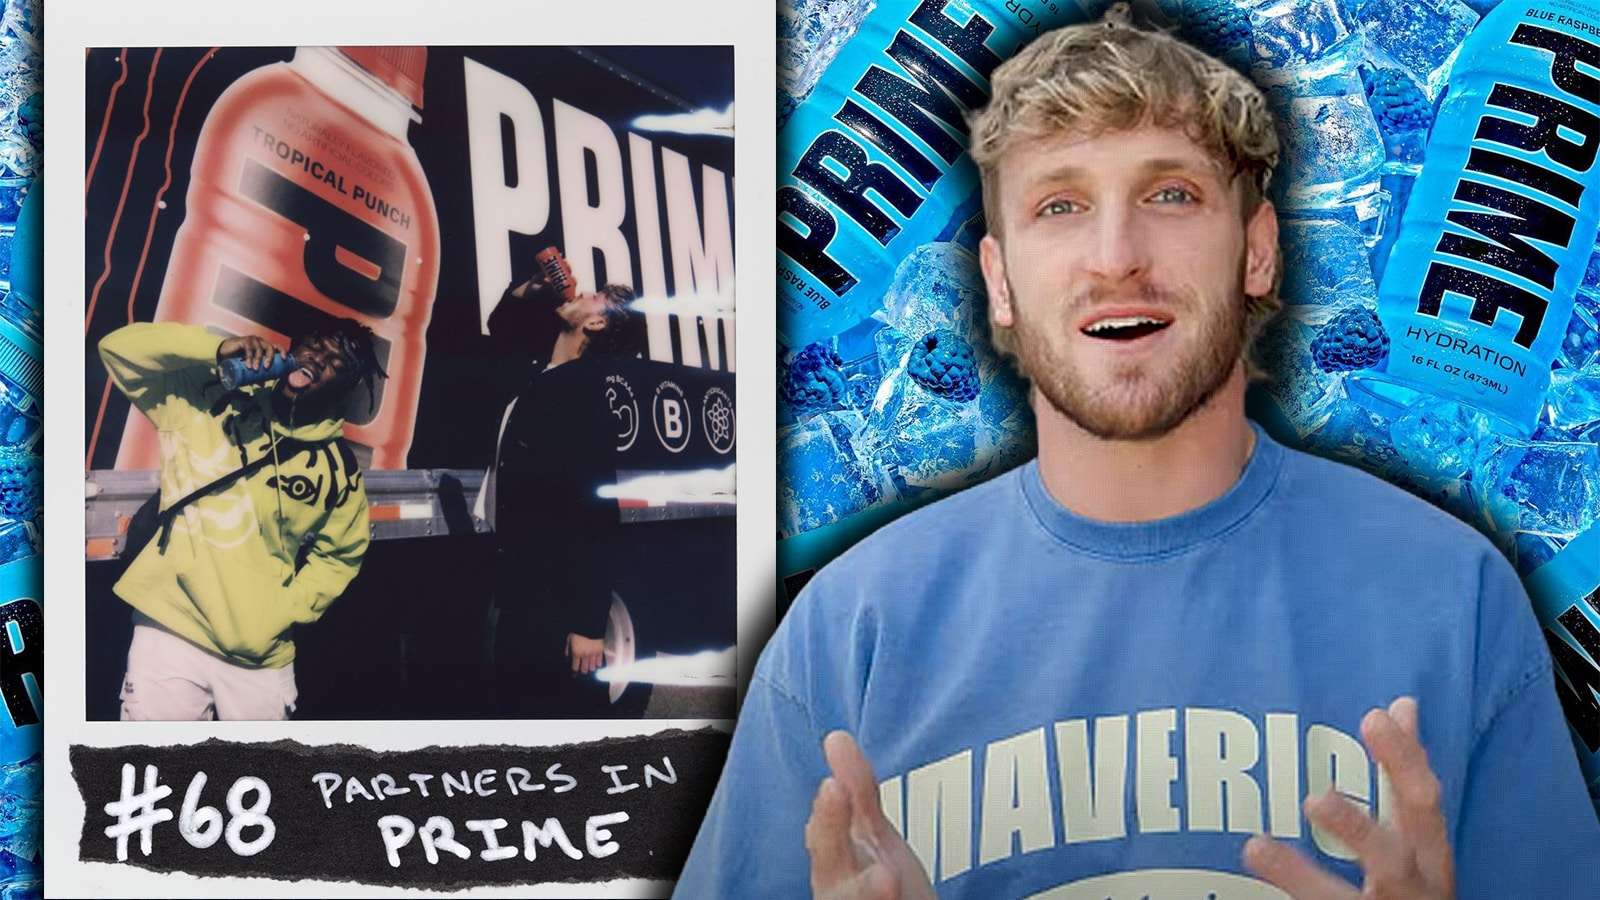 Logan Paul selling shares in prime with new originals nft